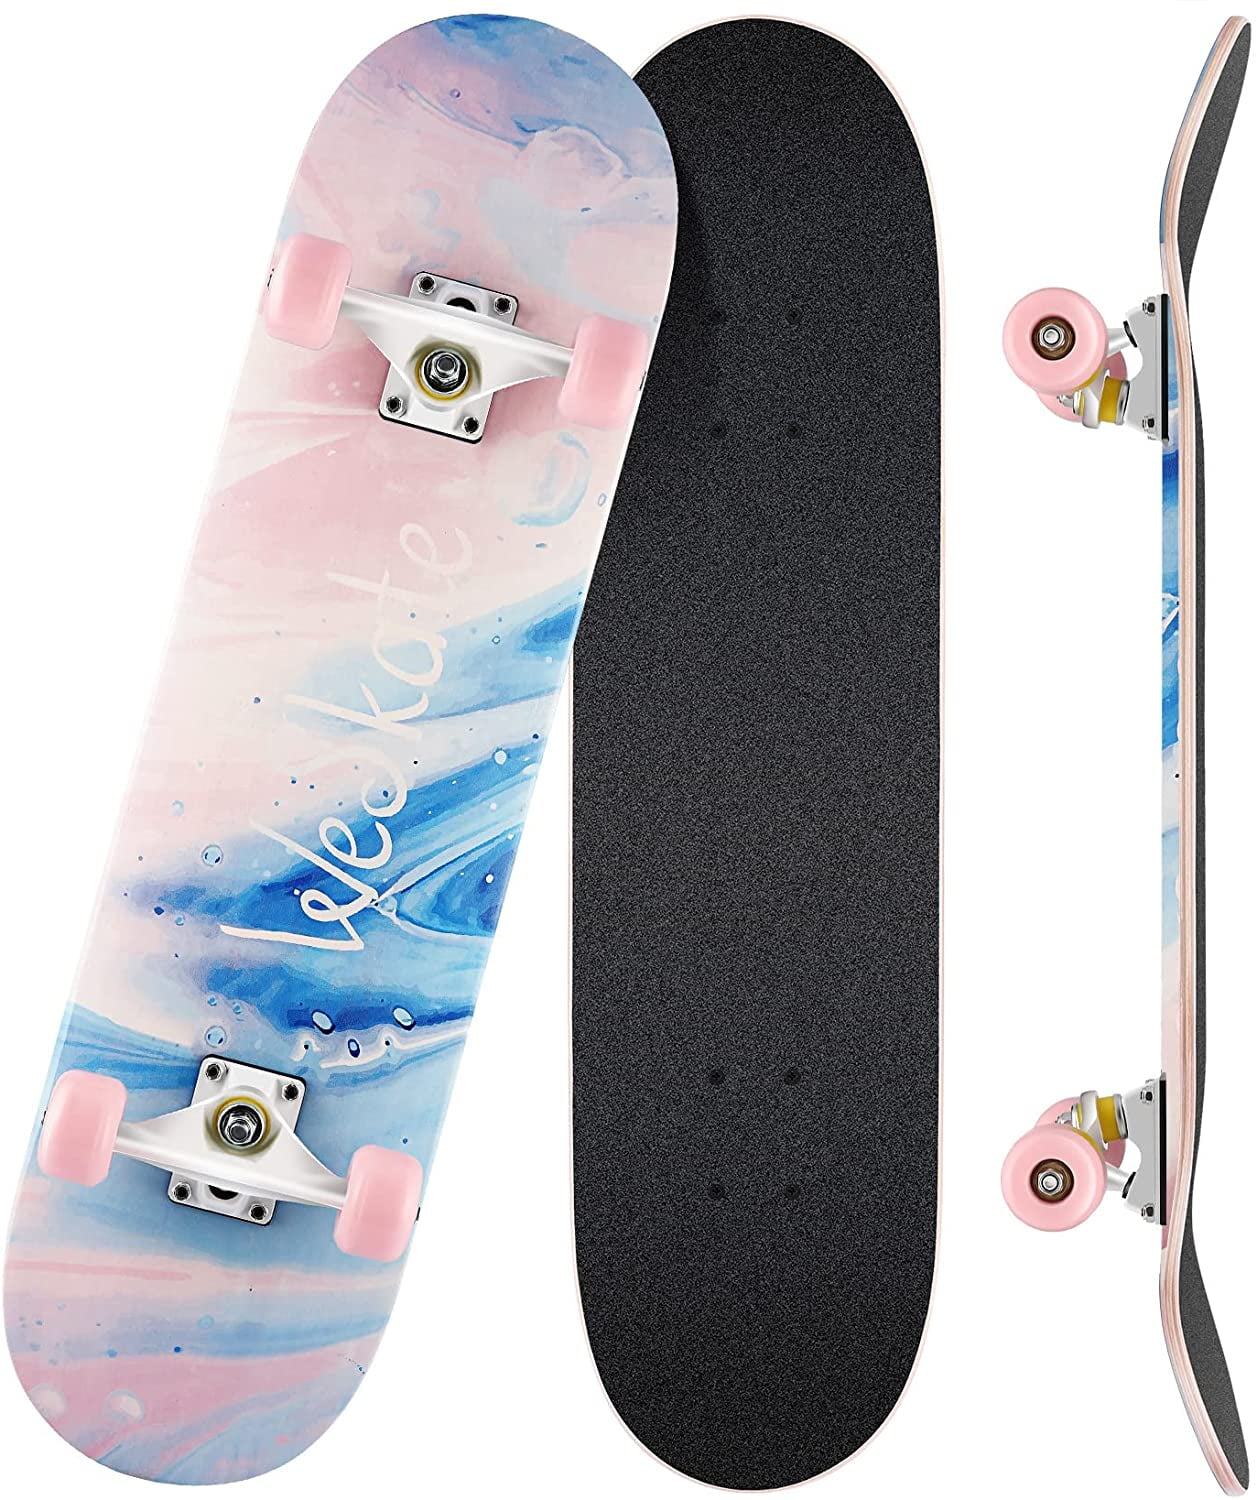 31 x 8Standard Skateboard for Kids 8 Layer Maple Pro Cruiser Complete Skateboards for Beginners Wood Double Kick Concave Skate Board for Girls Boys Teens Adults with All-in-One Skate T-Tool